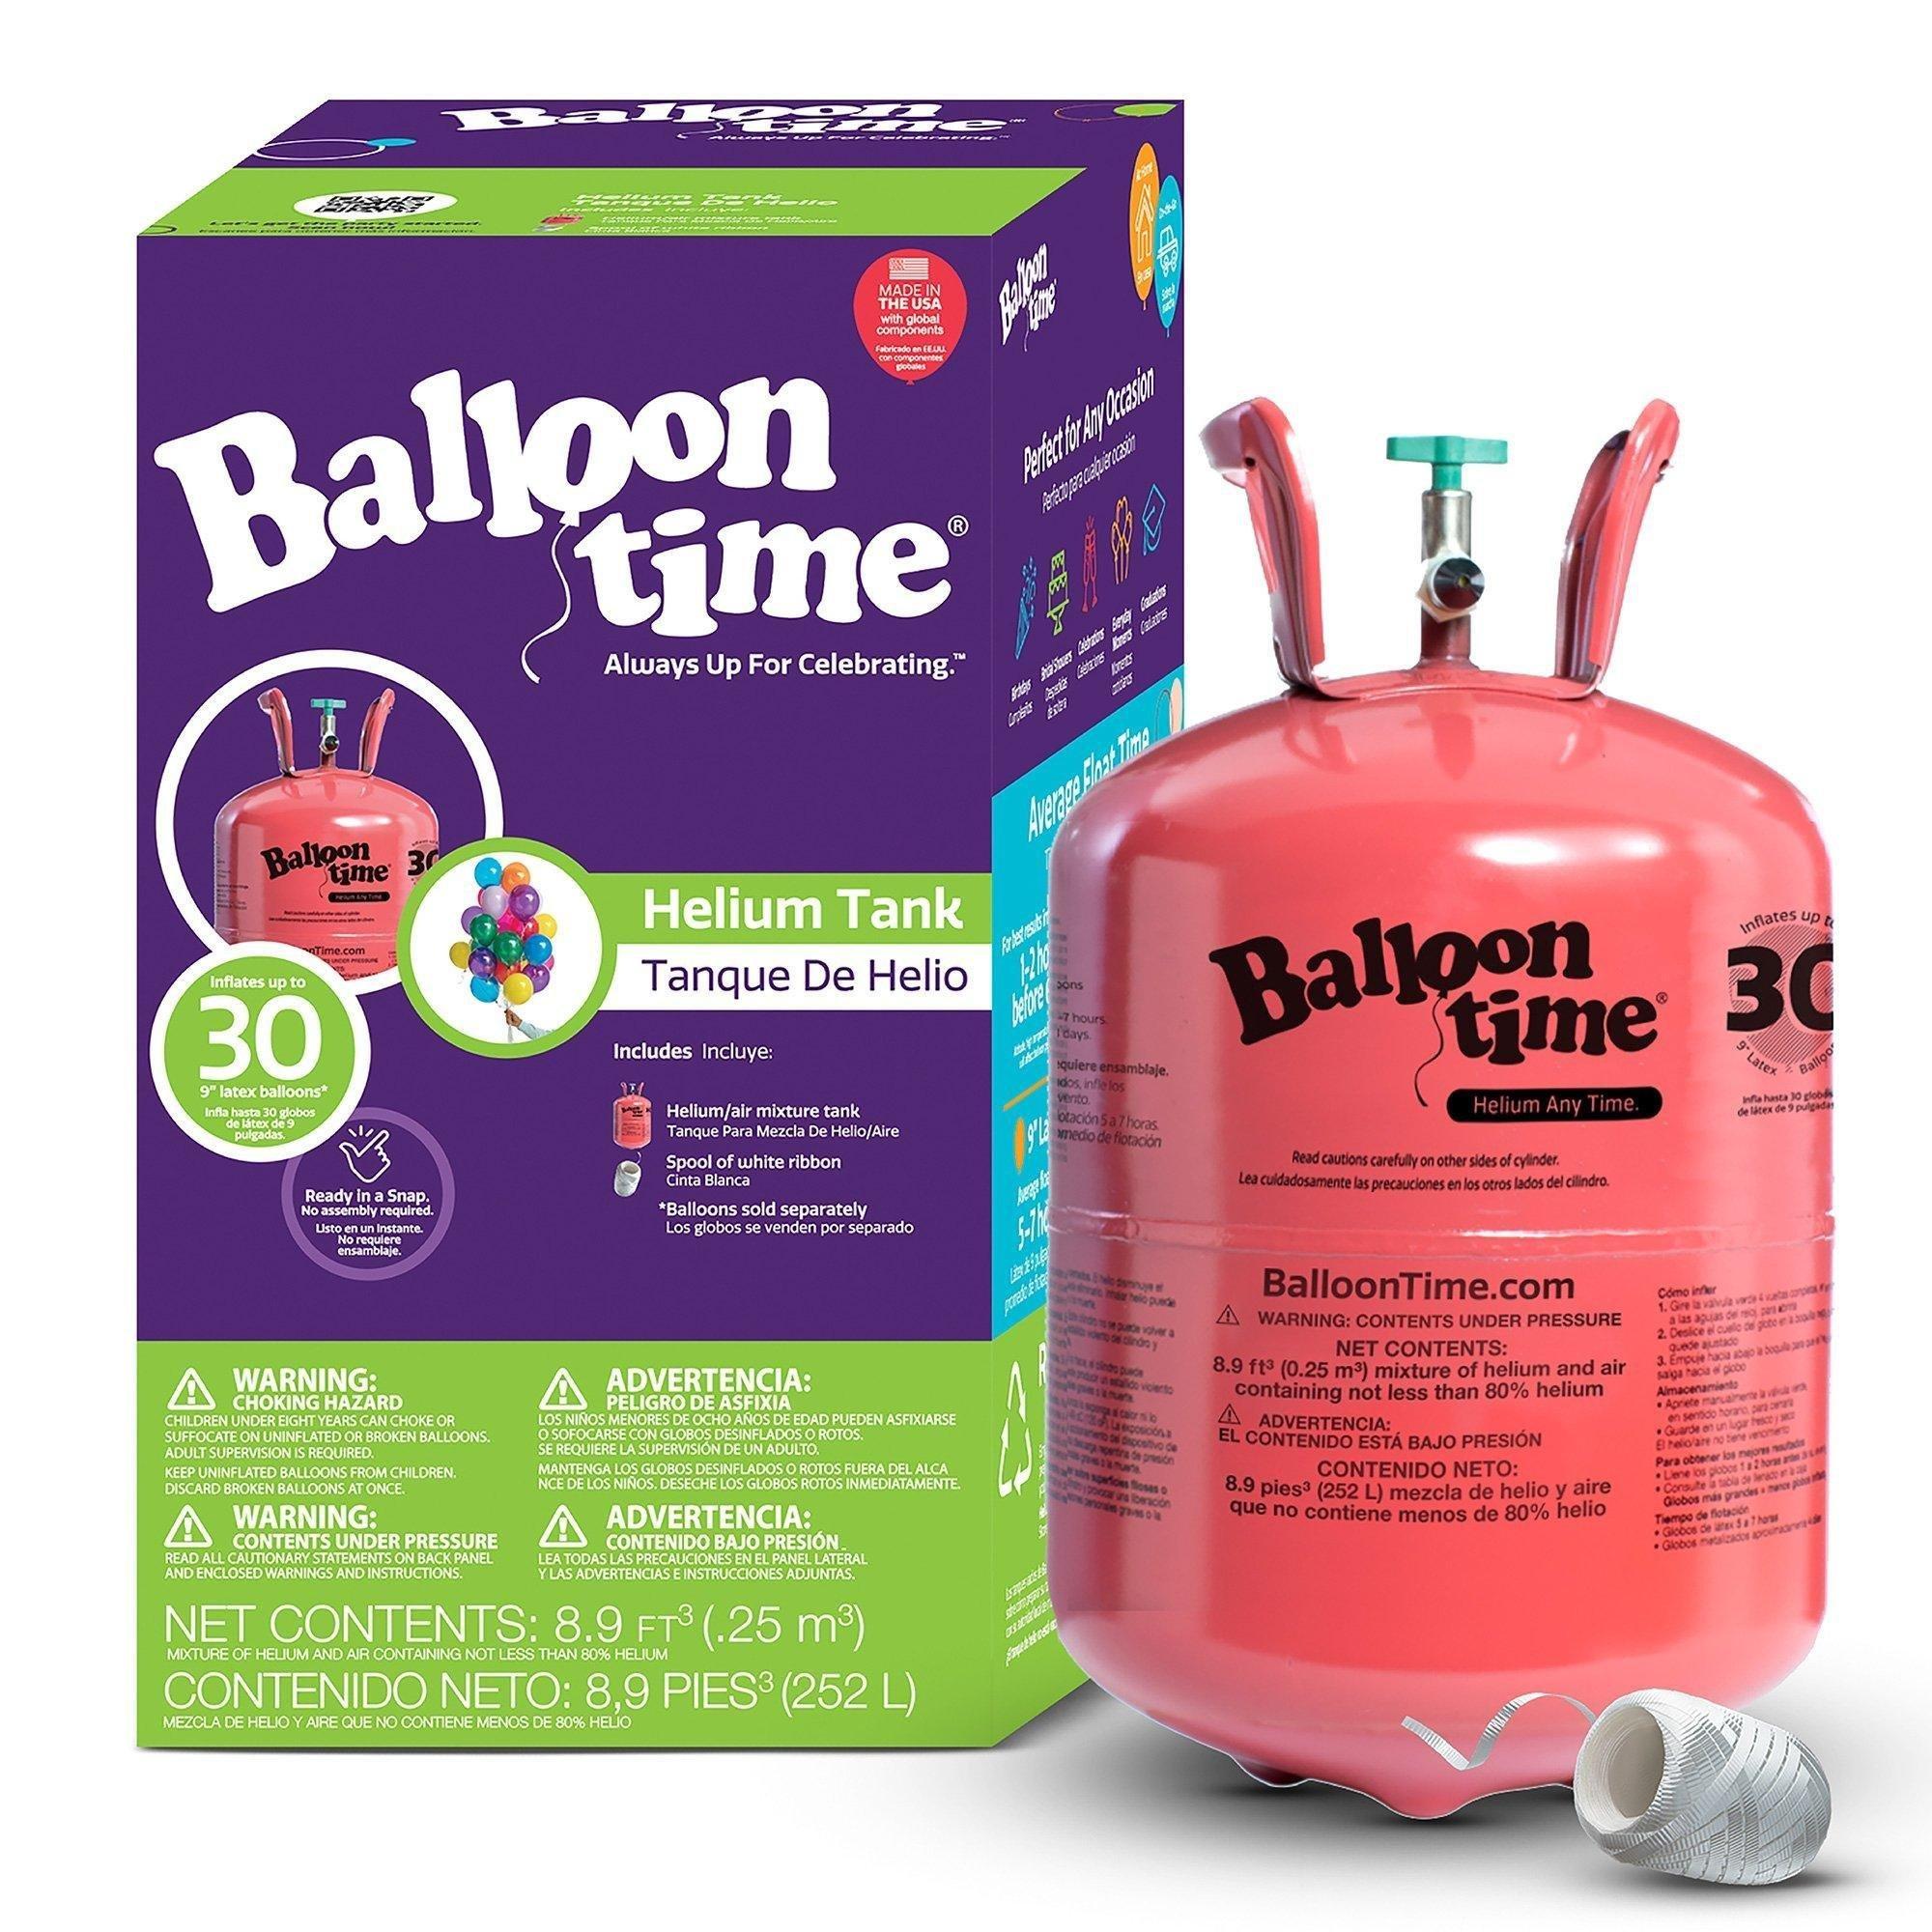 Unique Helium Ballon Tank Kit For Birthday Party, Includes 50 Balloons &  Ribbons